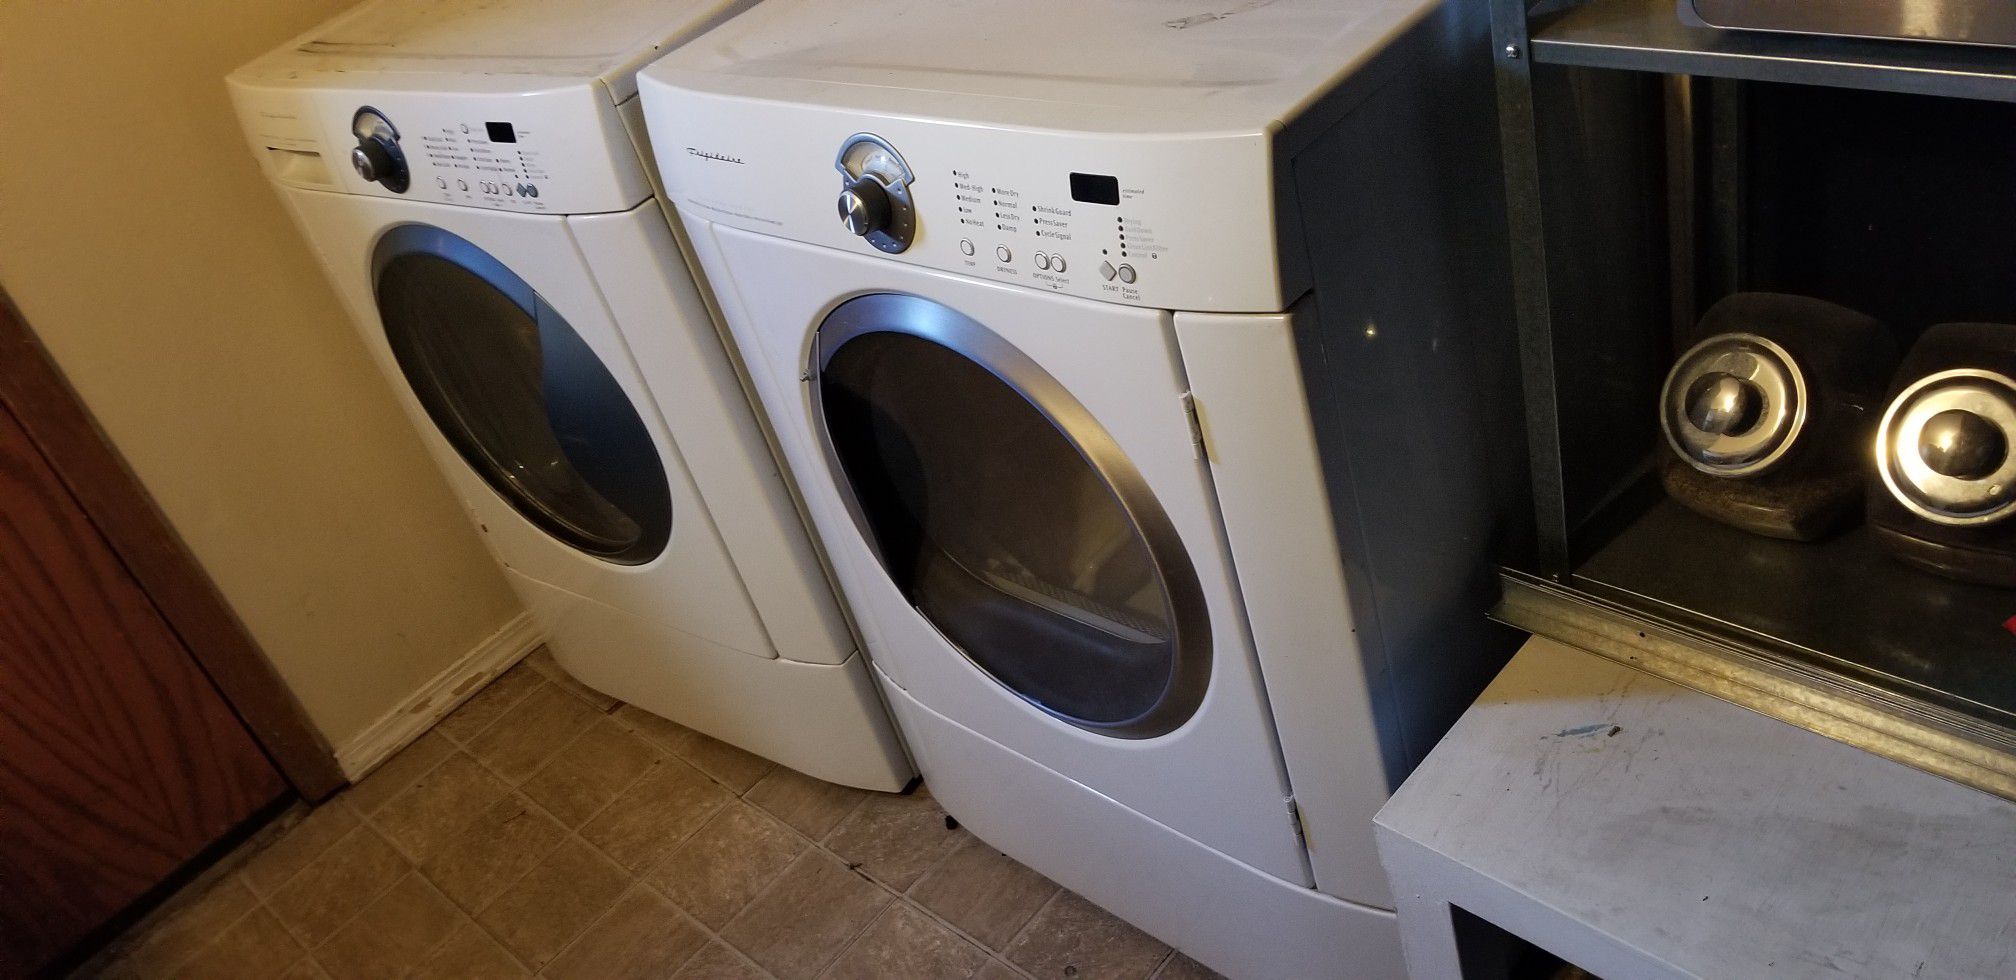 Frigidaire washer and electric dryer